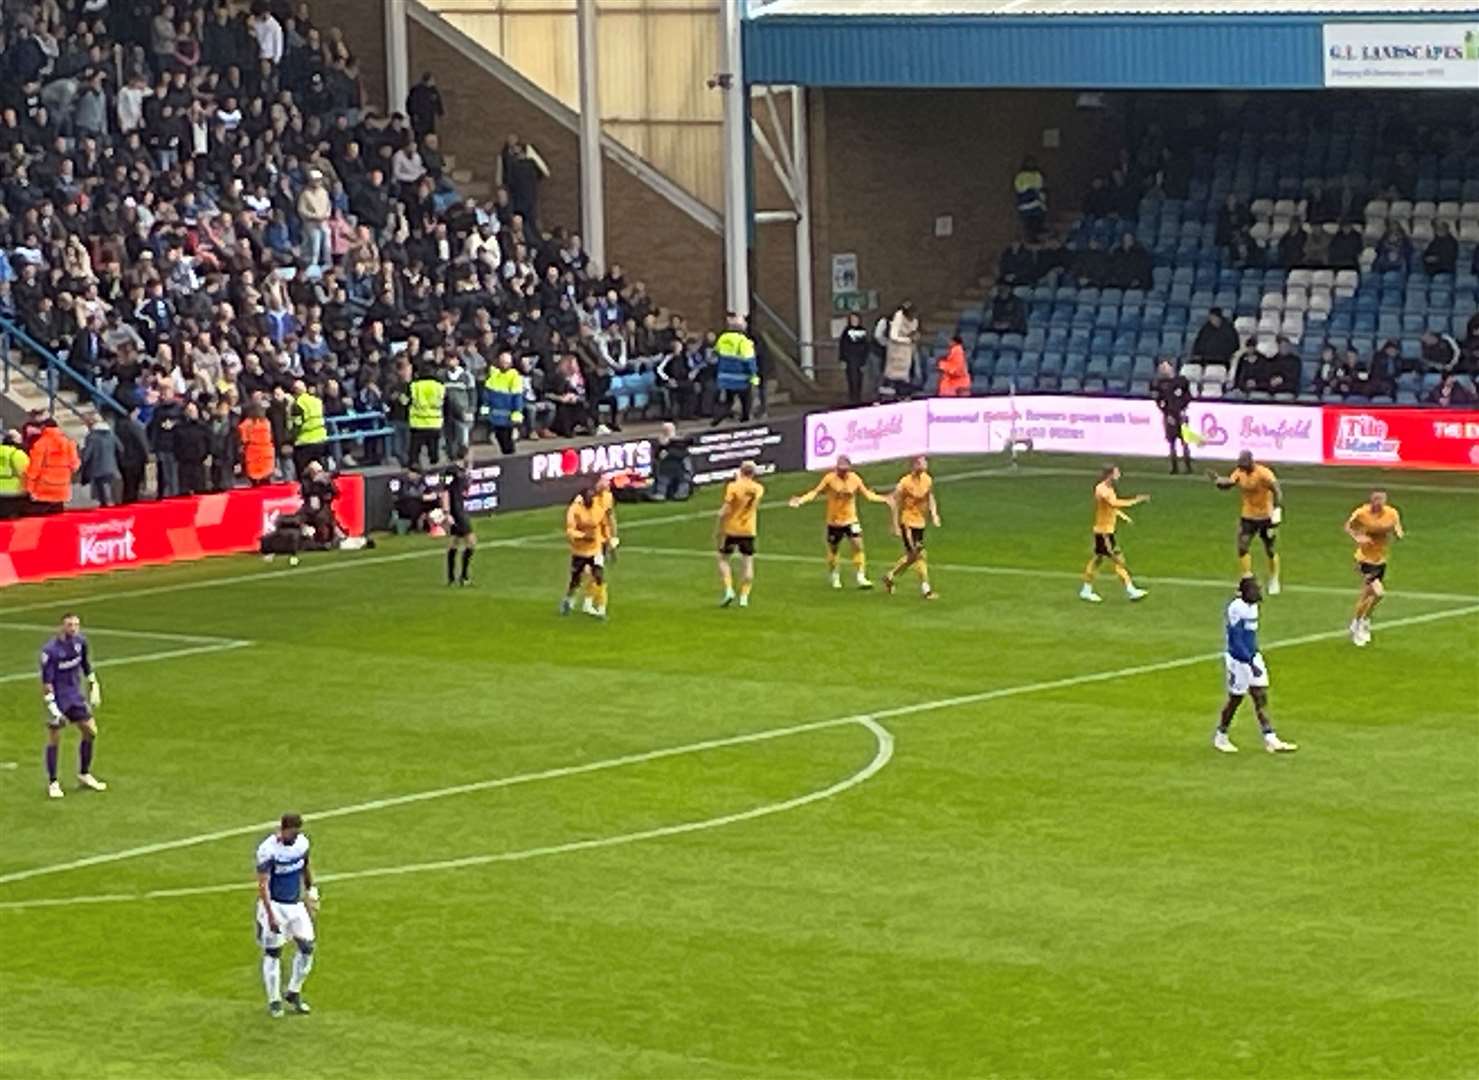 Trouble at Priestfield after Omar Bogle scored his first penalty for Newport